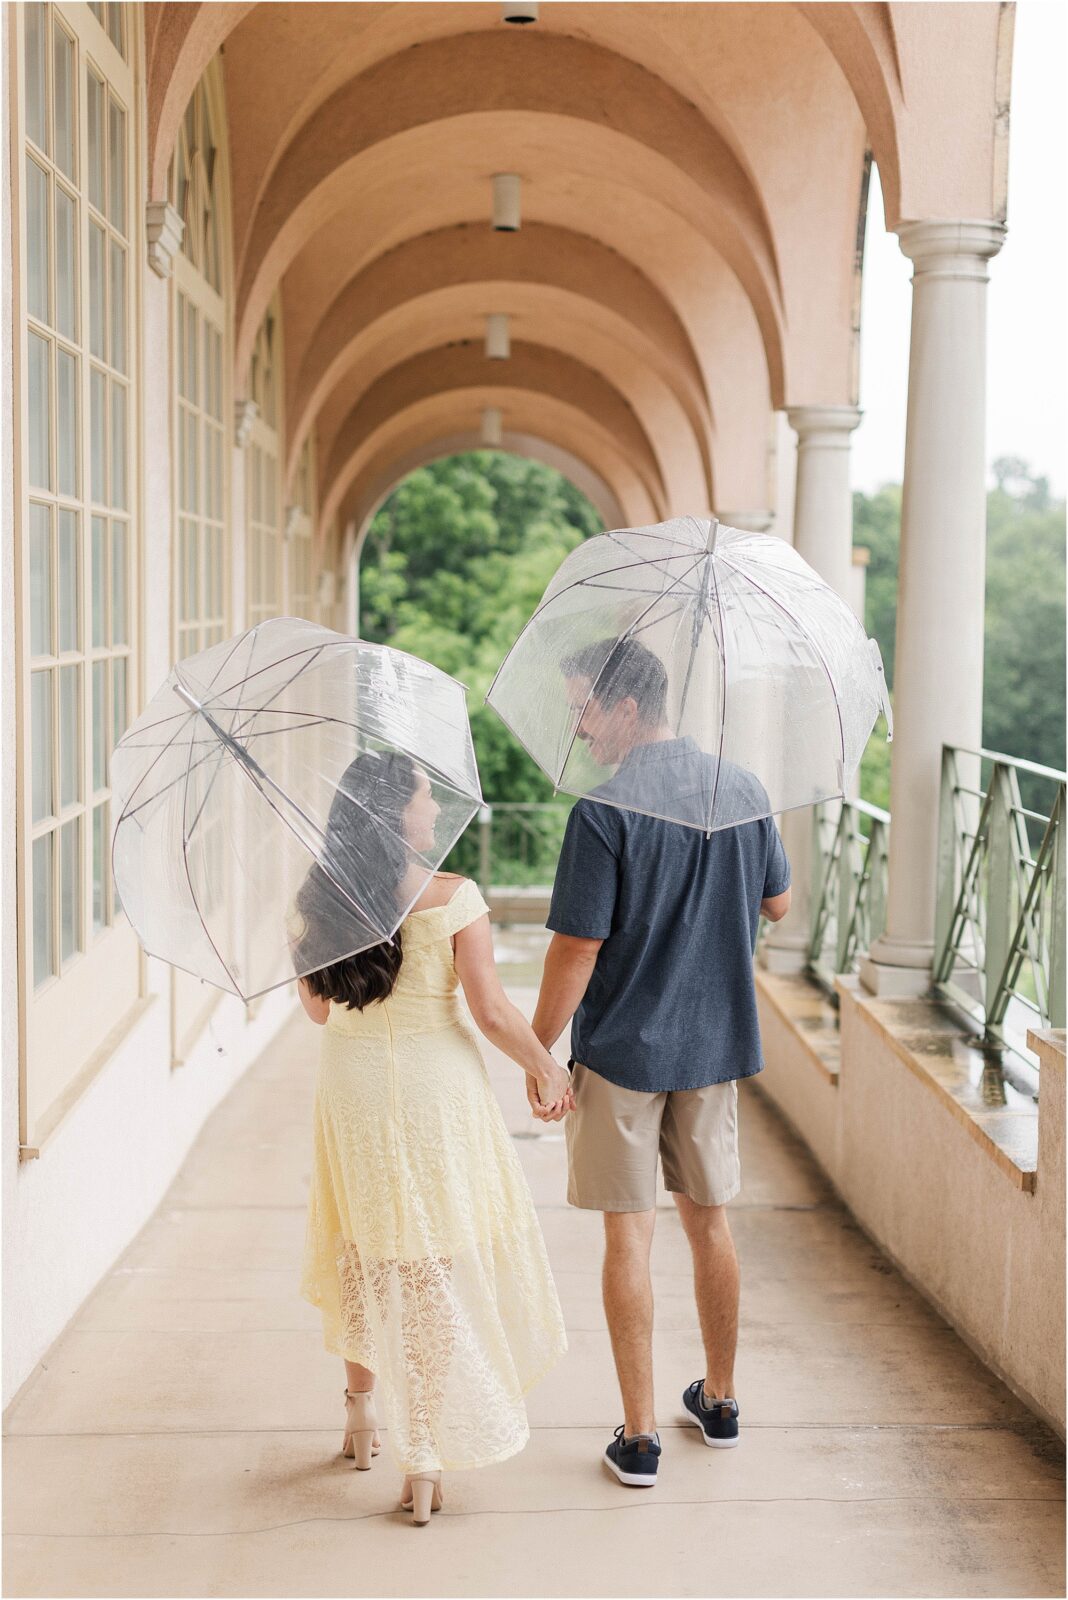 Bride and groom walking hand in hand at a rainy engagement session at the philbrook